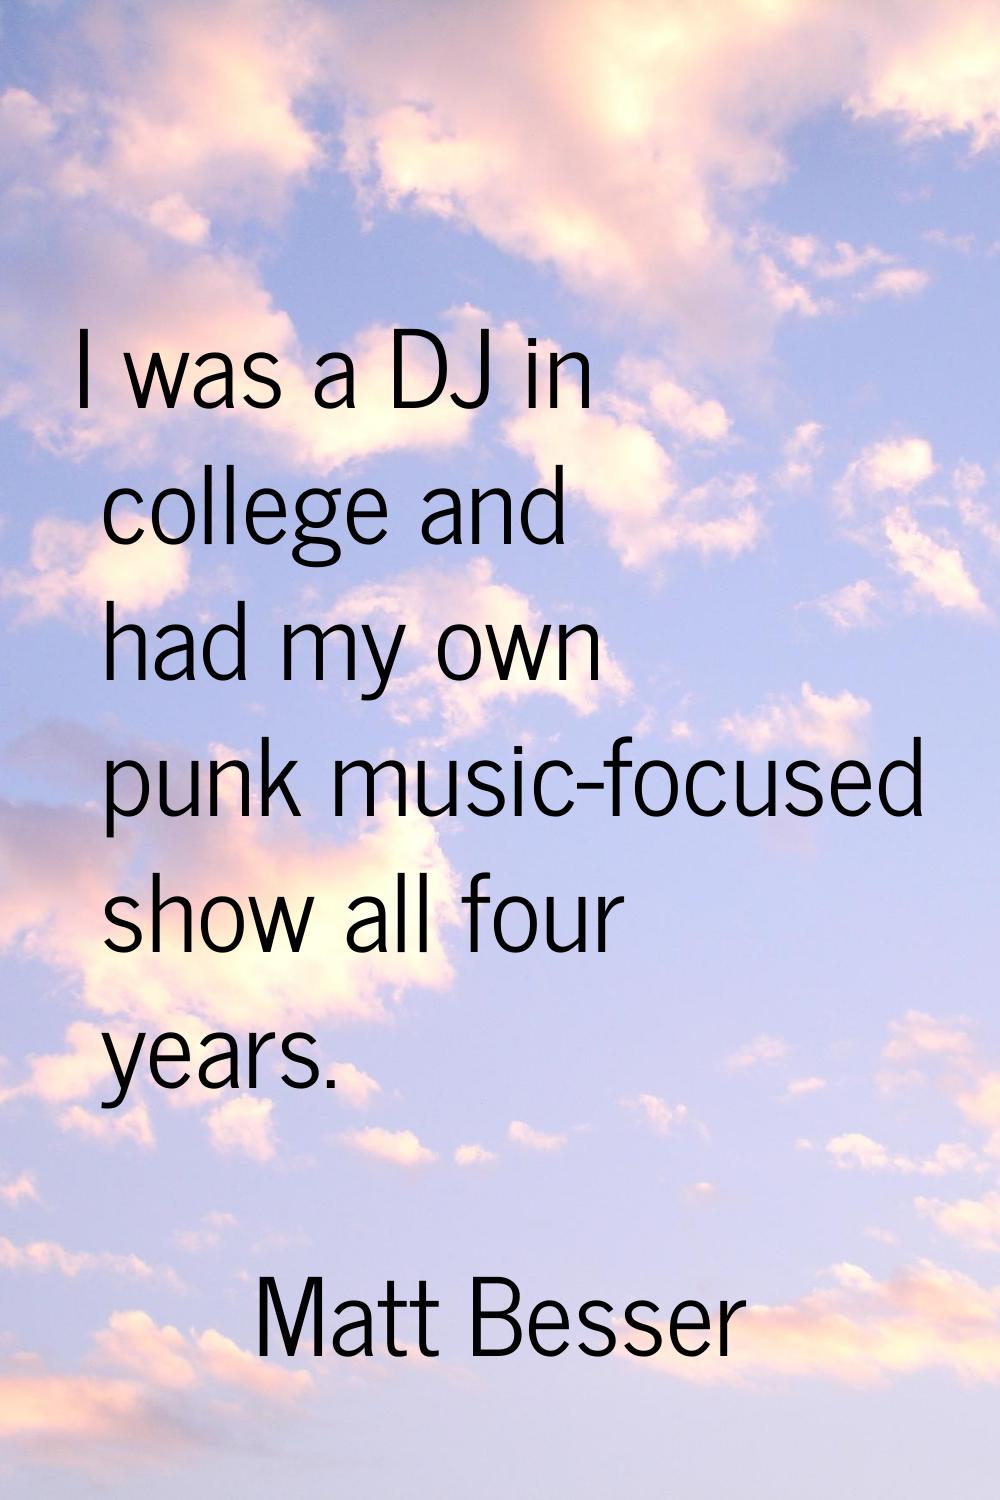 I was a DJ in college and had my own punk music-focused show all four years.